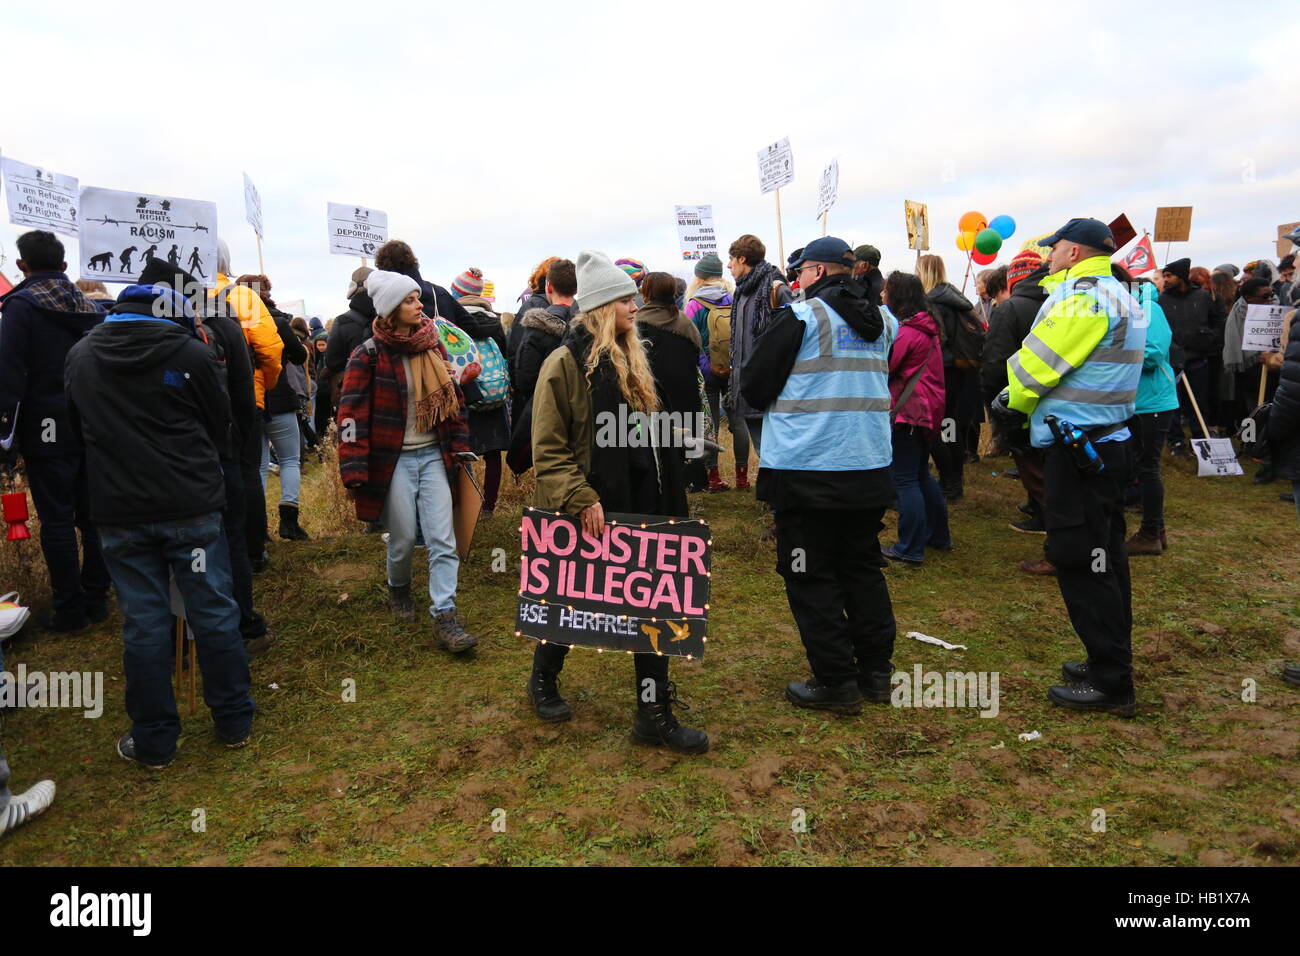 Yarls Wood Detention Centre, Bedford, UK. 3rd December, 2016. Nearly 2000 demonstrators protest at the fence of the centre, calling for Yarls Wood Detention Centre to be closed down. Penelope Barritt/Alamy Live News Stock Photo